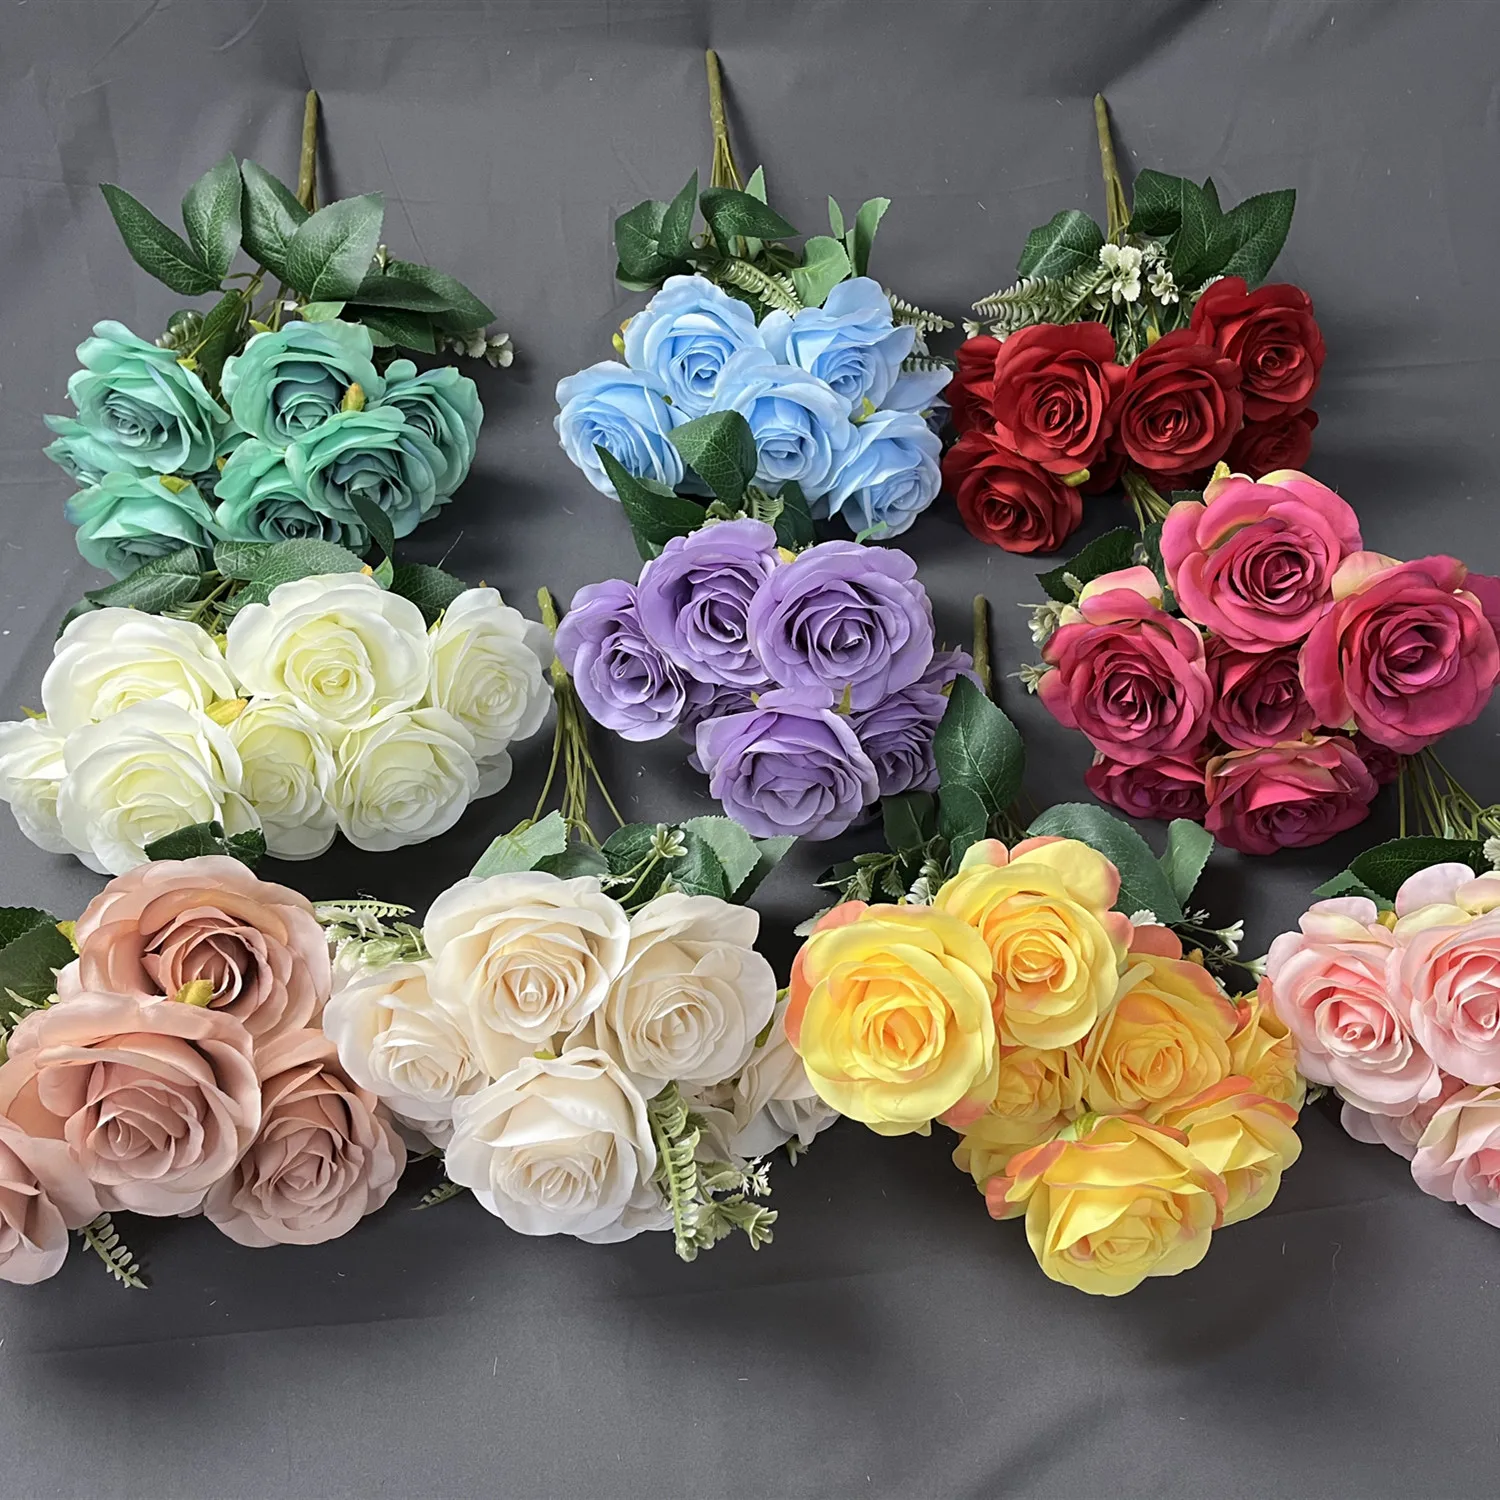 

QSLH-CF002 Whole Sale Wedding Decoration Rose Bunch Artificial Silk Rose 9 Heads Rose Bouquet Blossom Multcoloured Silk Flowers